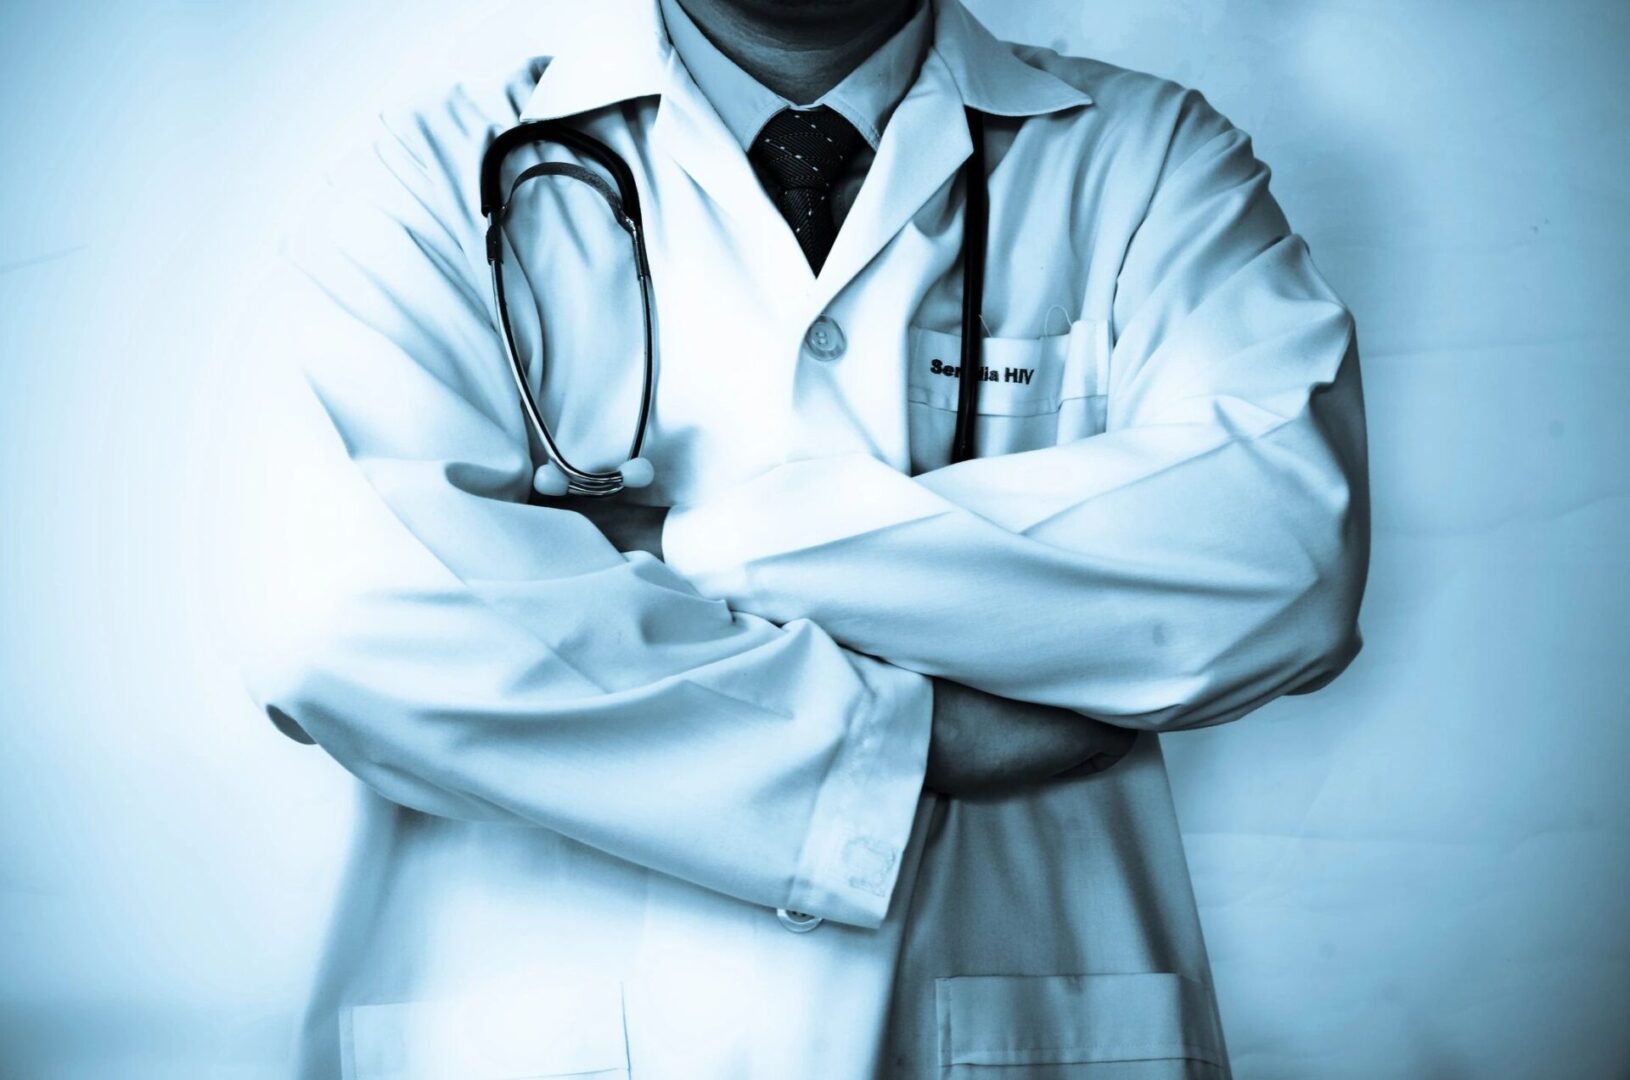 A doctor on white coat with stethoscope